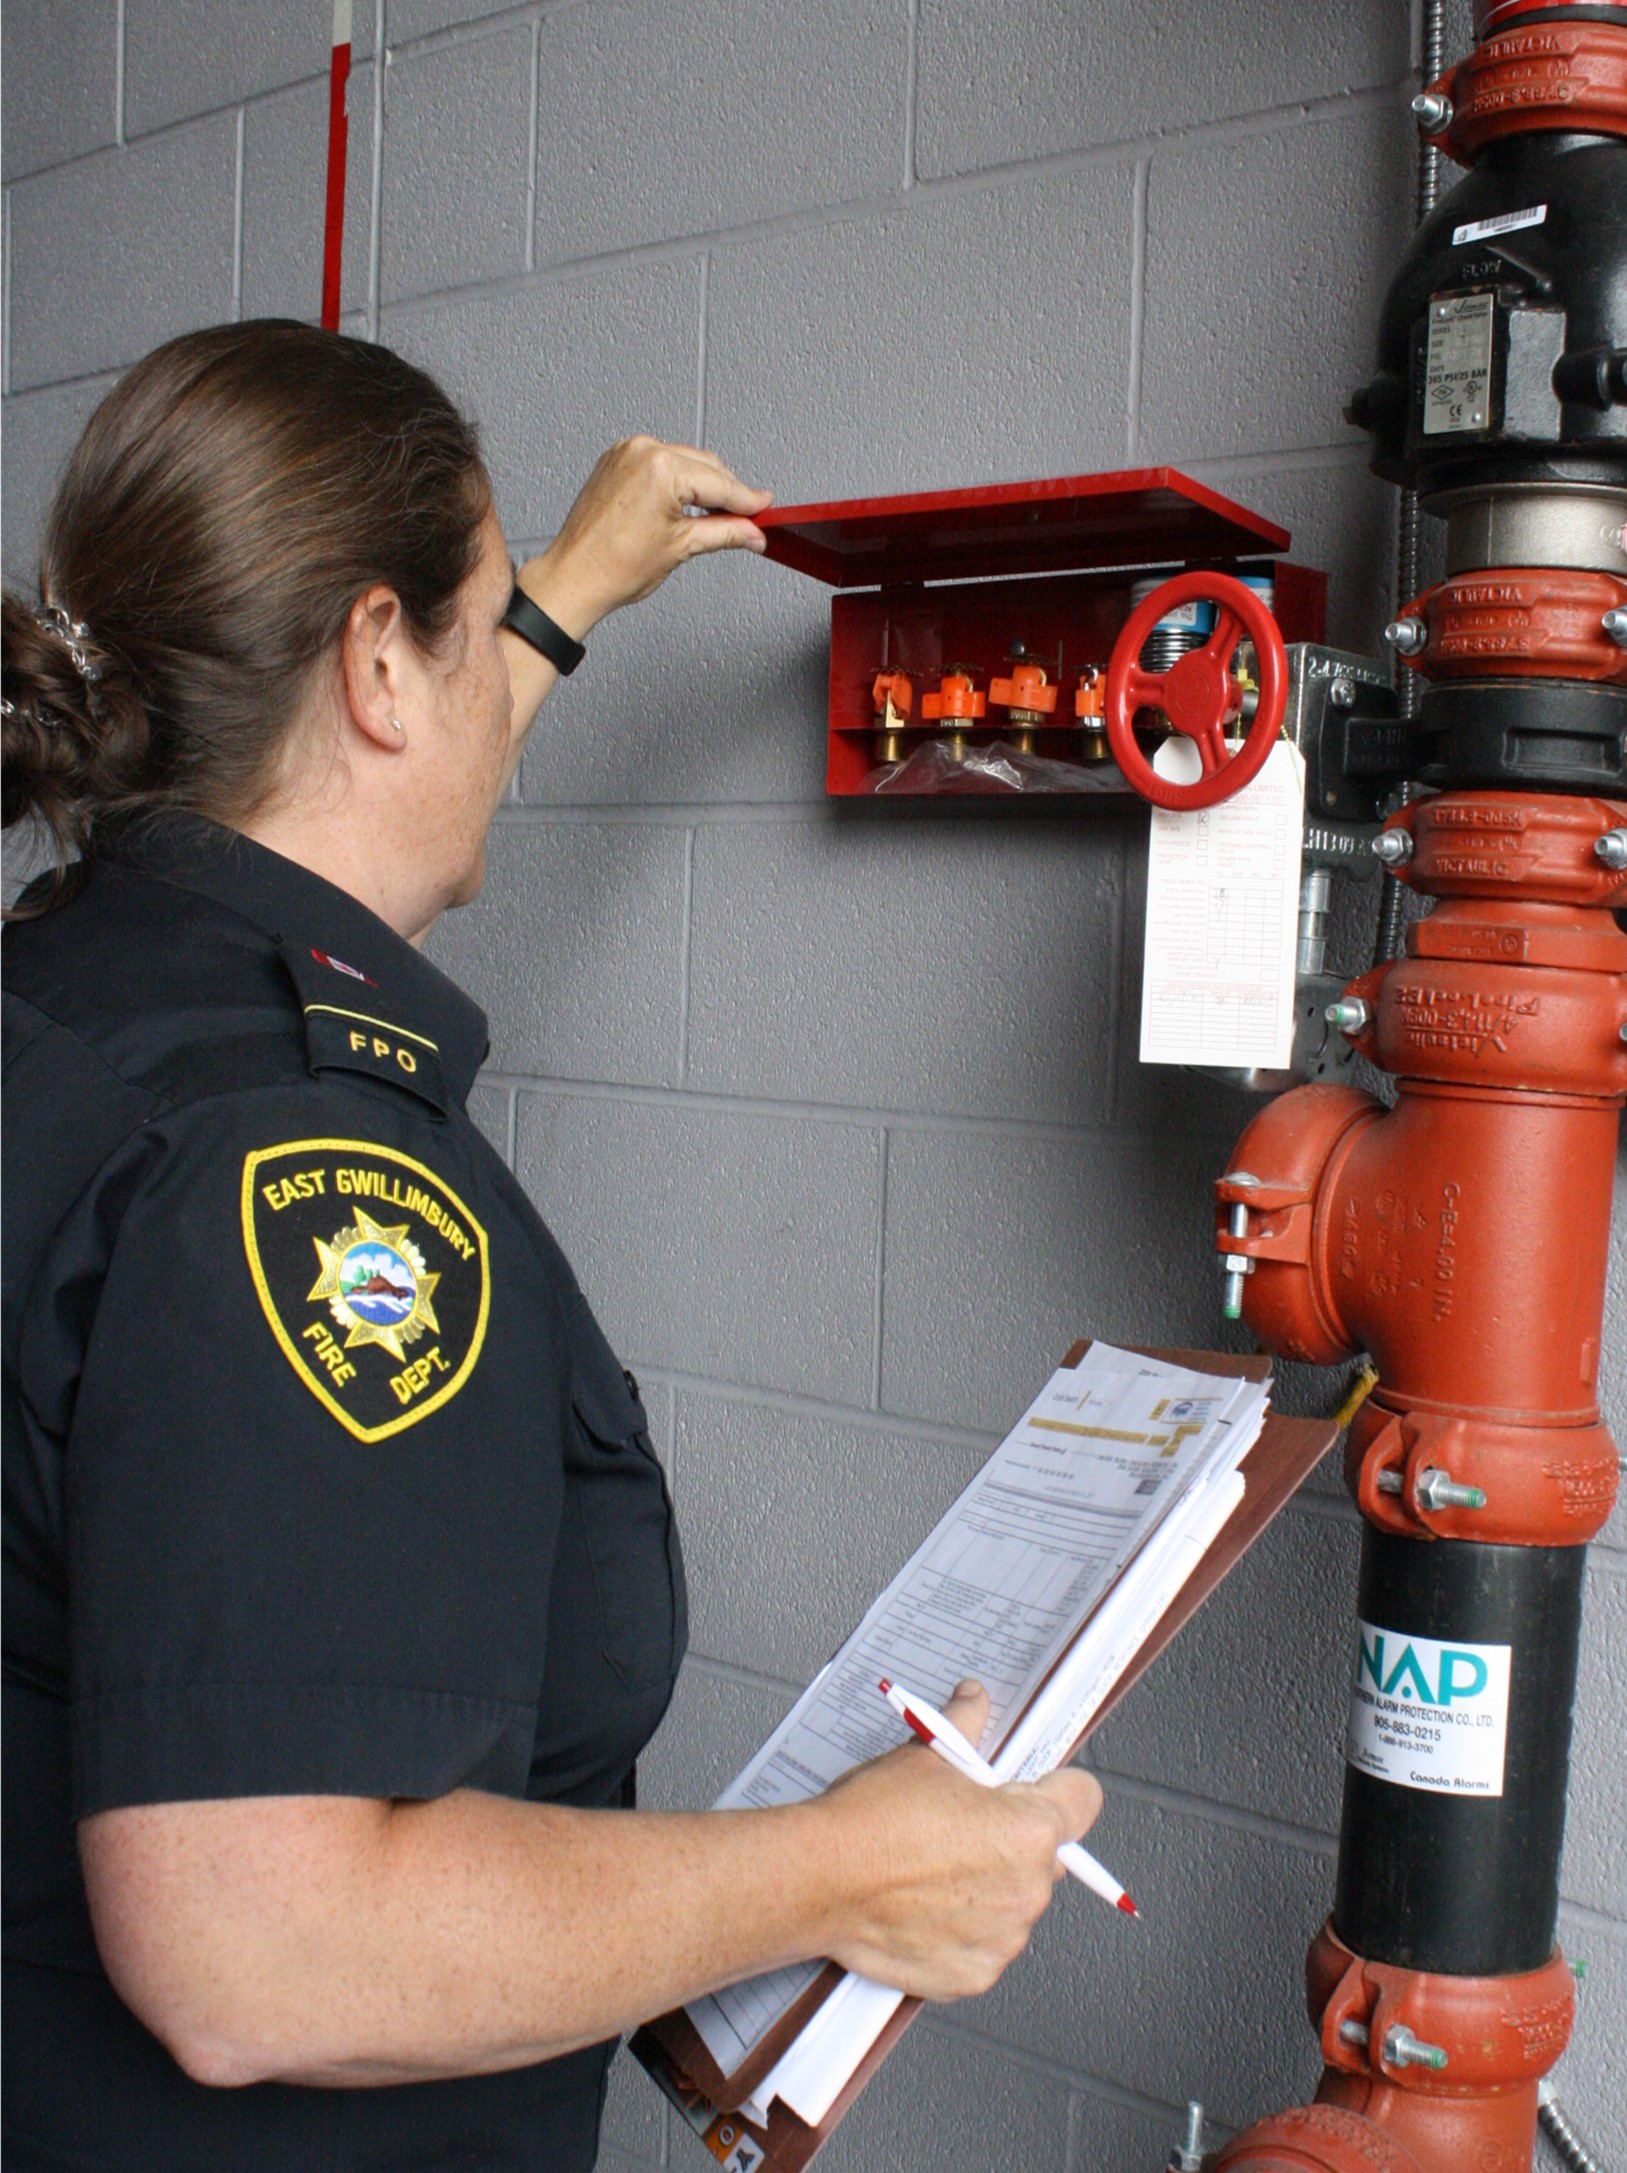 Fire prevention staff conduct a fire safety inspection.